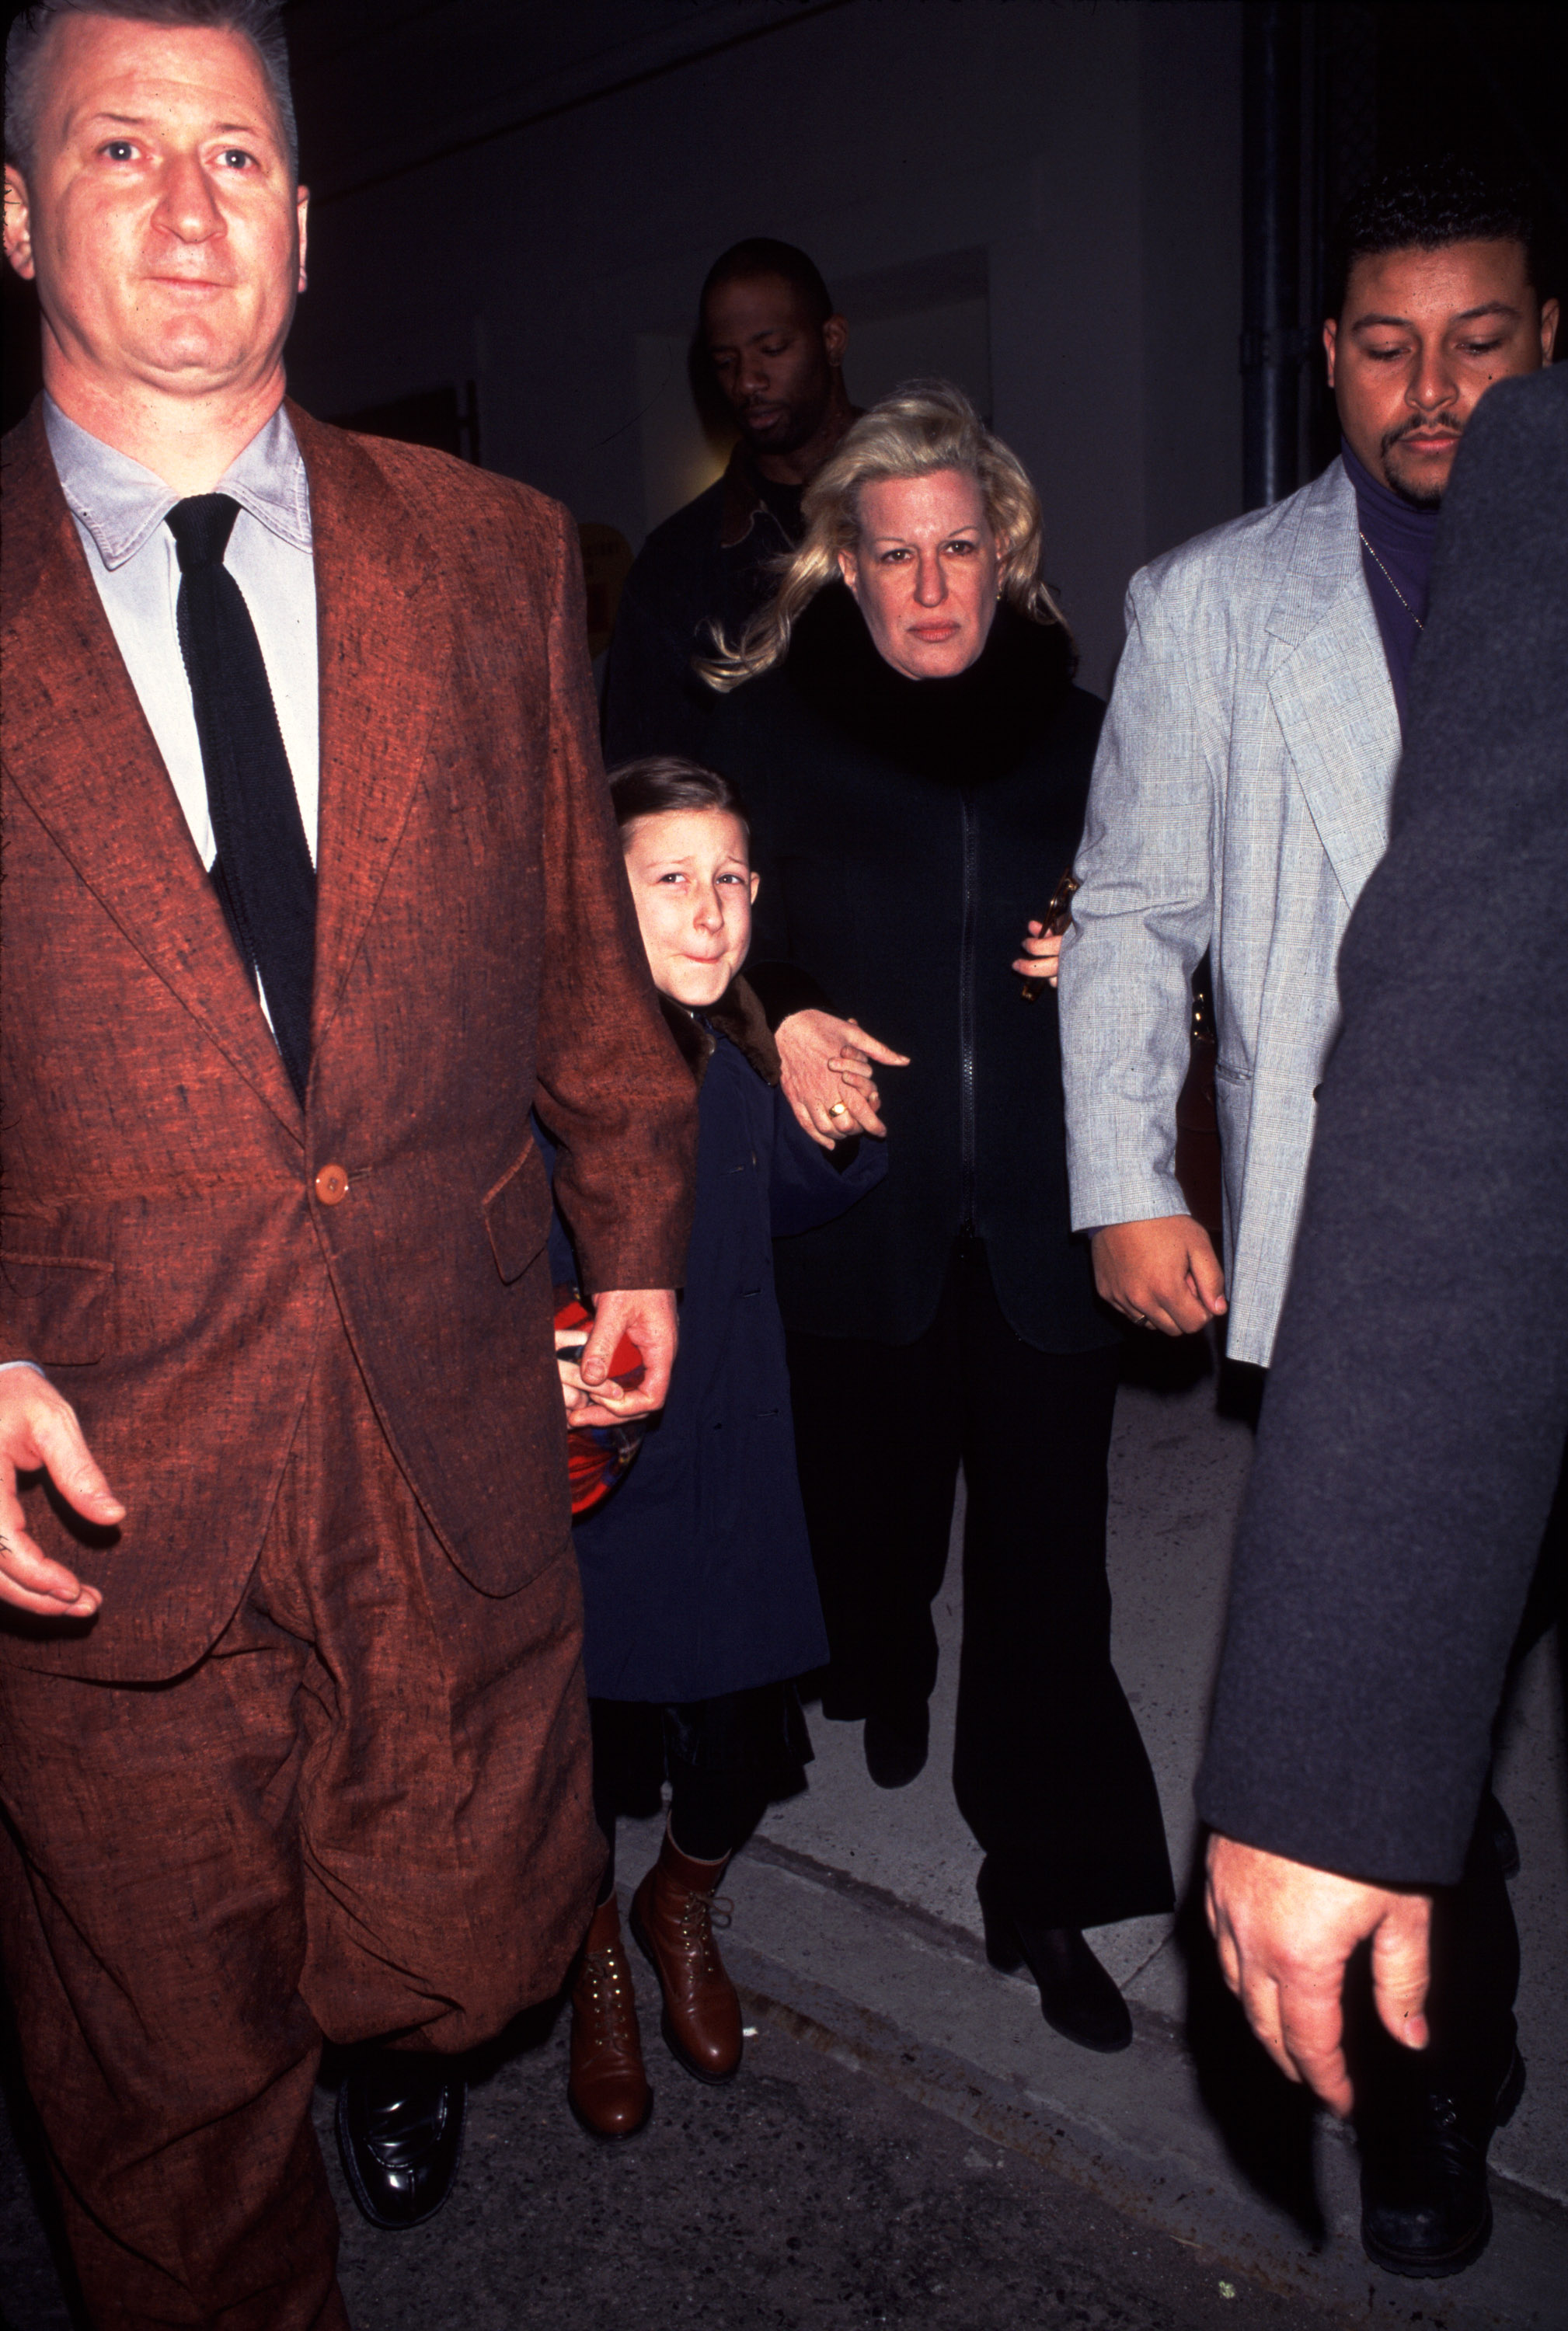 Bette Midler and her daughter attend the Memorial for Louis Malle on February 29, 2000 in New York City. | Source: Getty Images